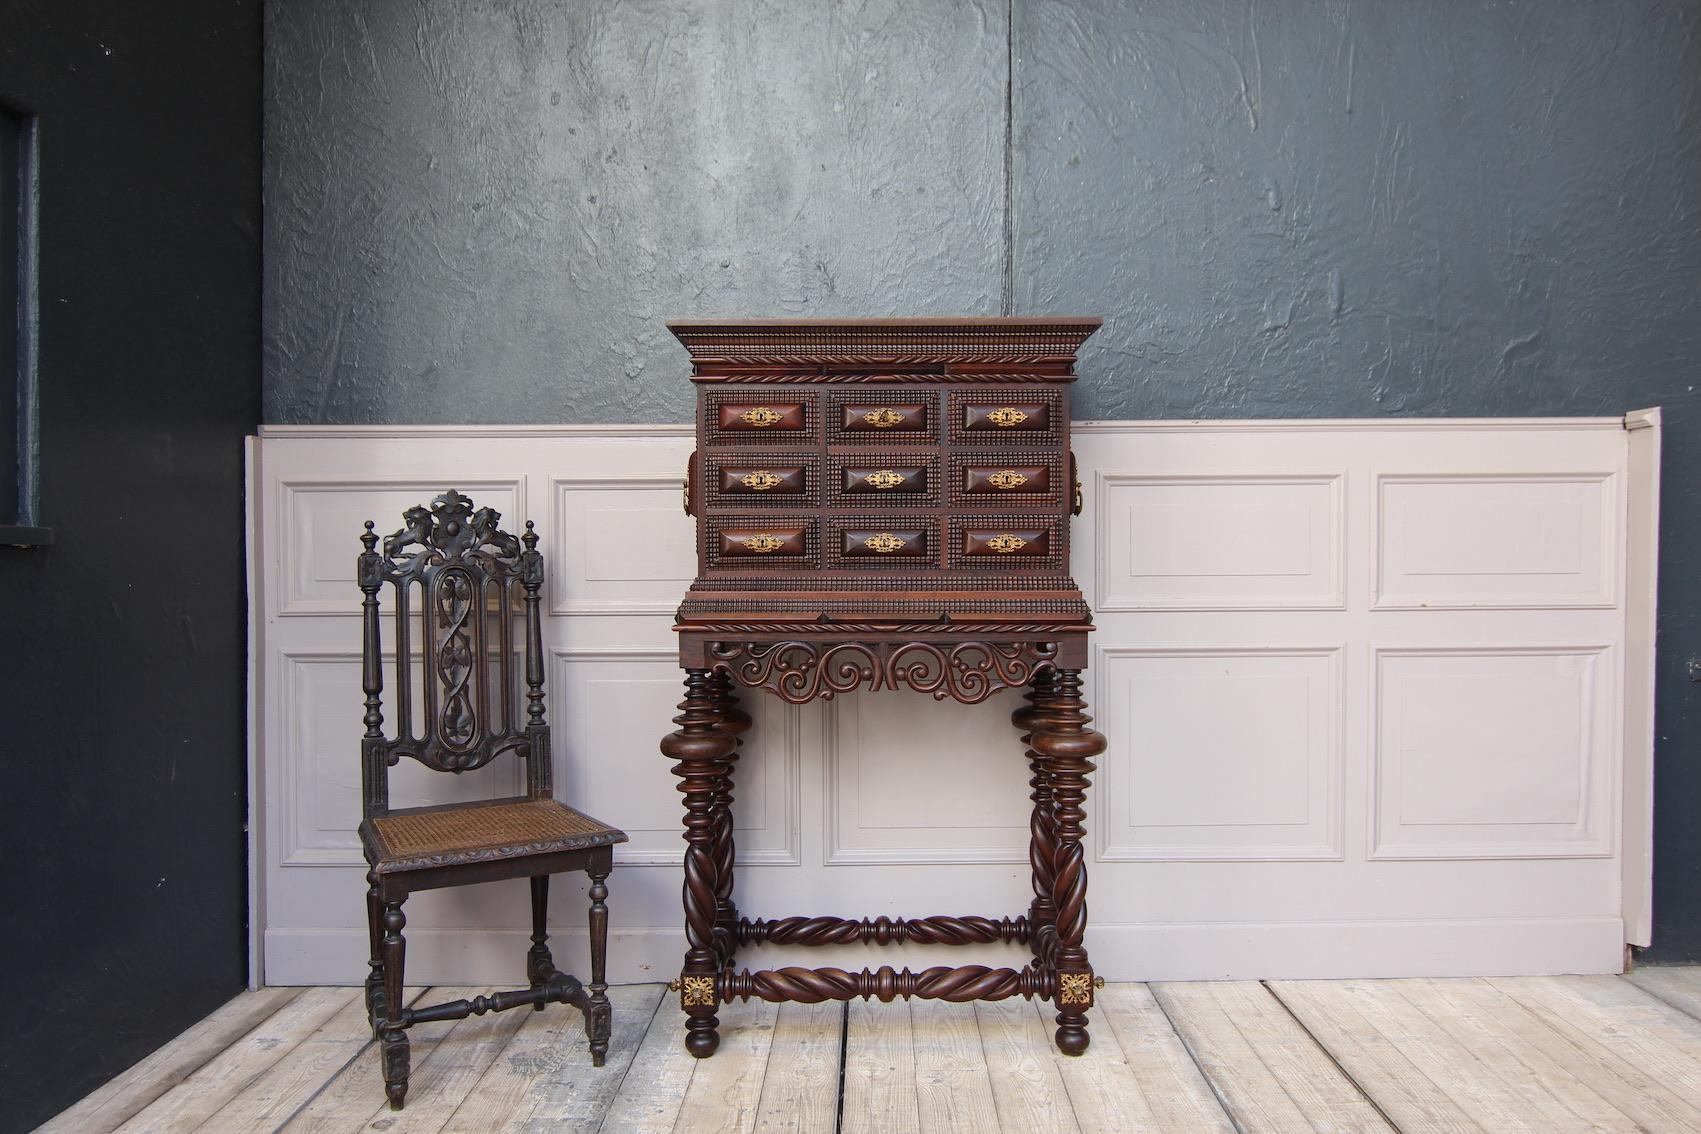 Portuguese cabinet with stand. Probably a quality replica from Lisbon from the 20th century of the famous Portuguese furniture from the colonial era in the 17th century, the 